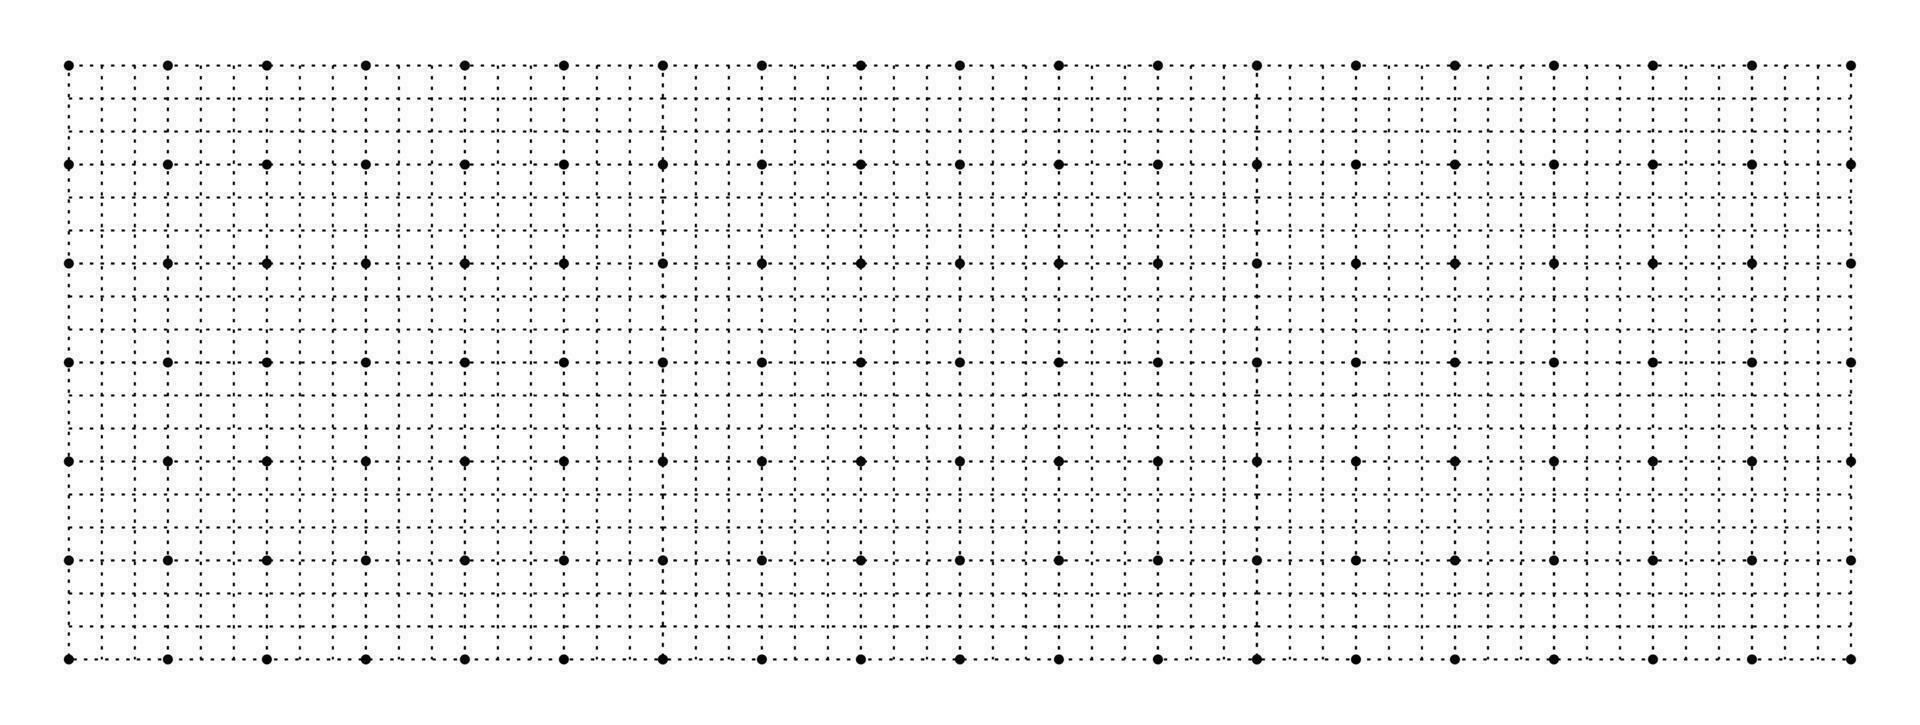 Geometric grid with squares and dots background. Measure blank white template with black lines for drafting and technical design with millimeter vector markings